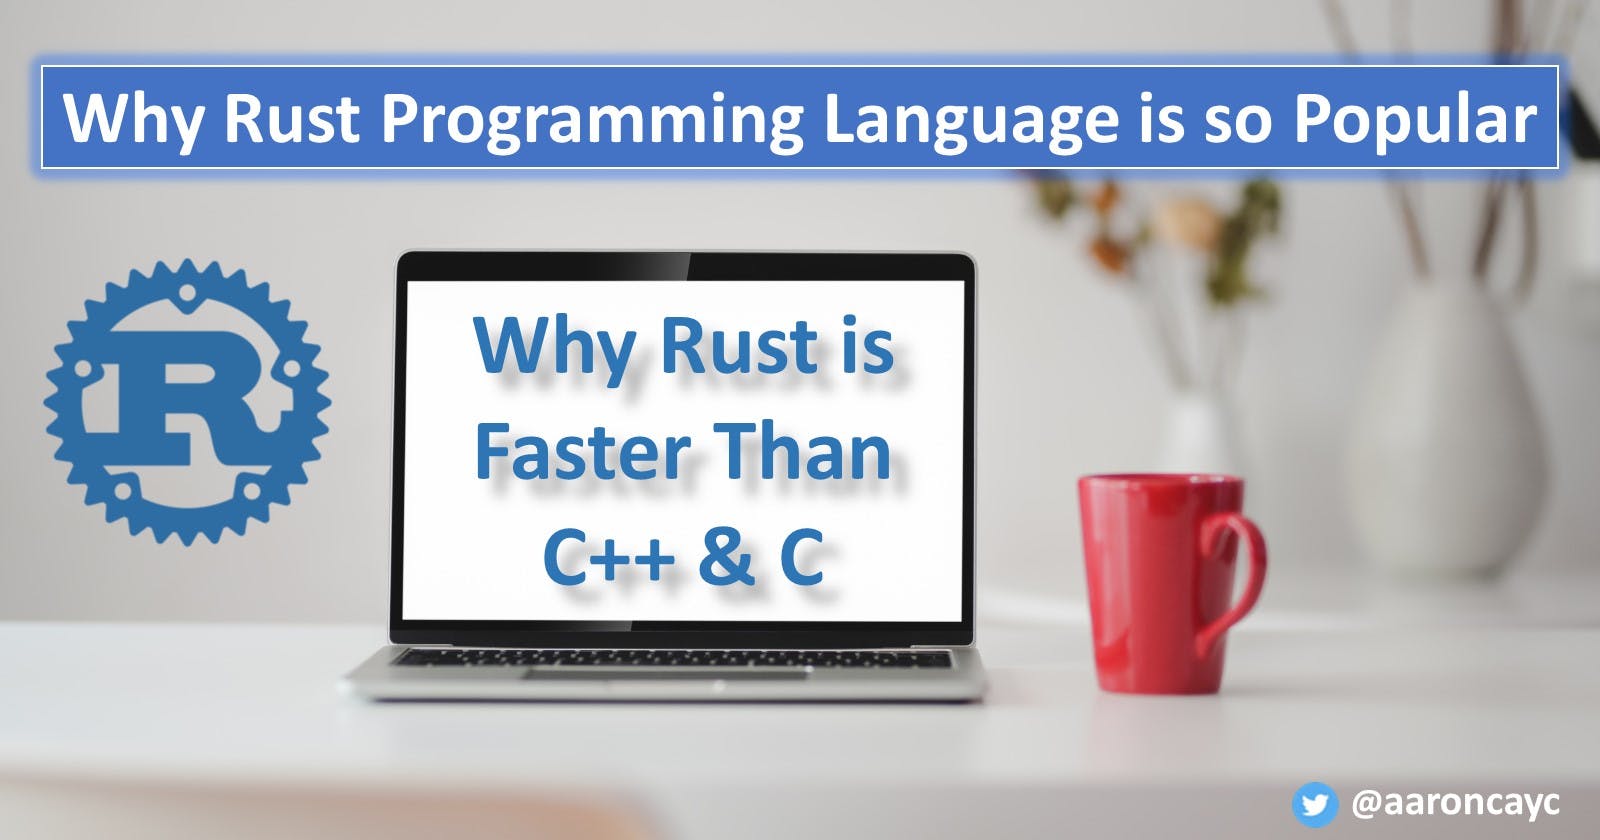 Why Rust Programming Language is So Popular and Why Its Faster Than C++ & C